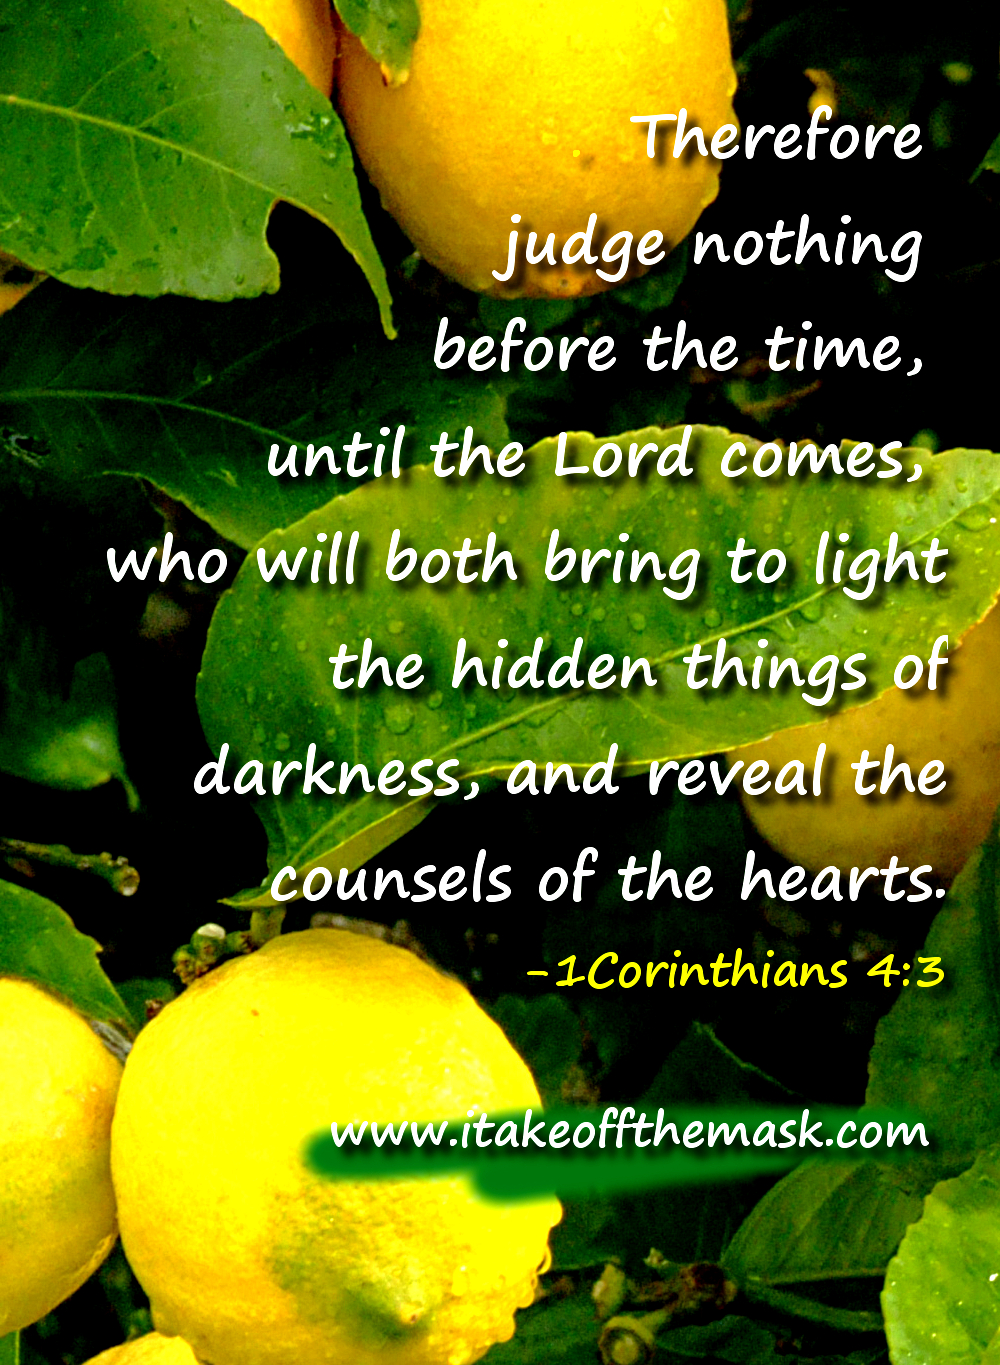 religious quotes about judging people